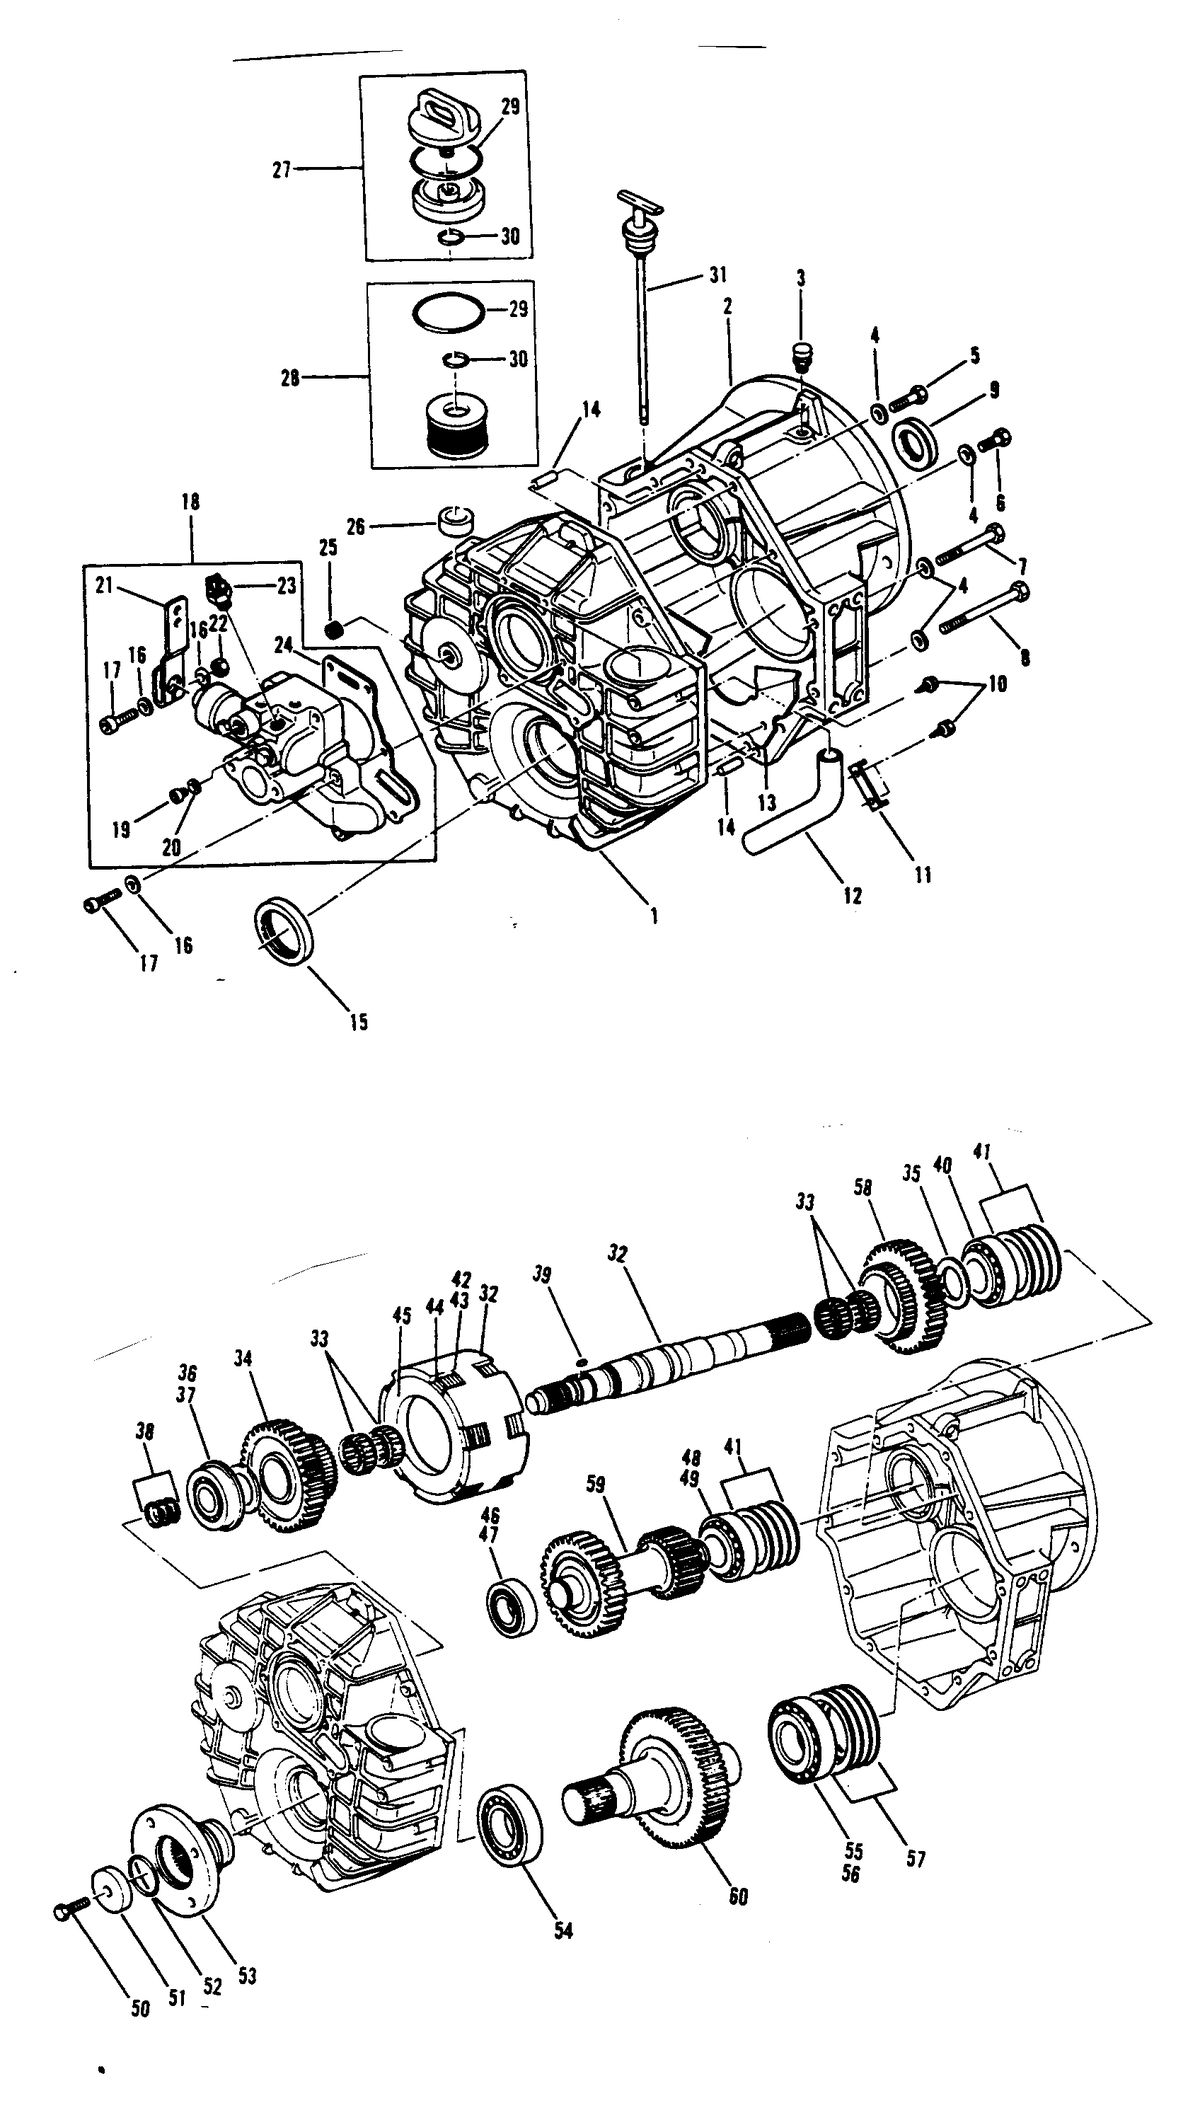 MERCRUISER HINO DIESEL 150 H.P. TRANSMISSION AND RELATED PARTS (TRANSMISSION ASSEMBLY)